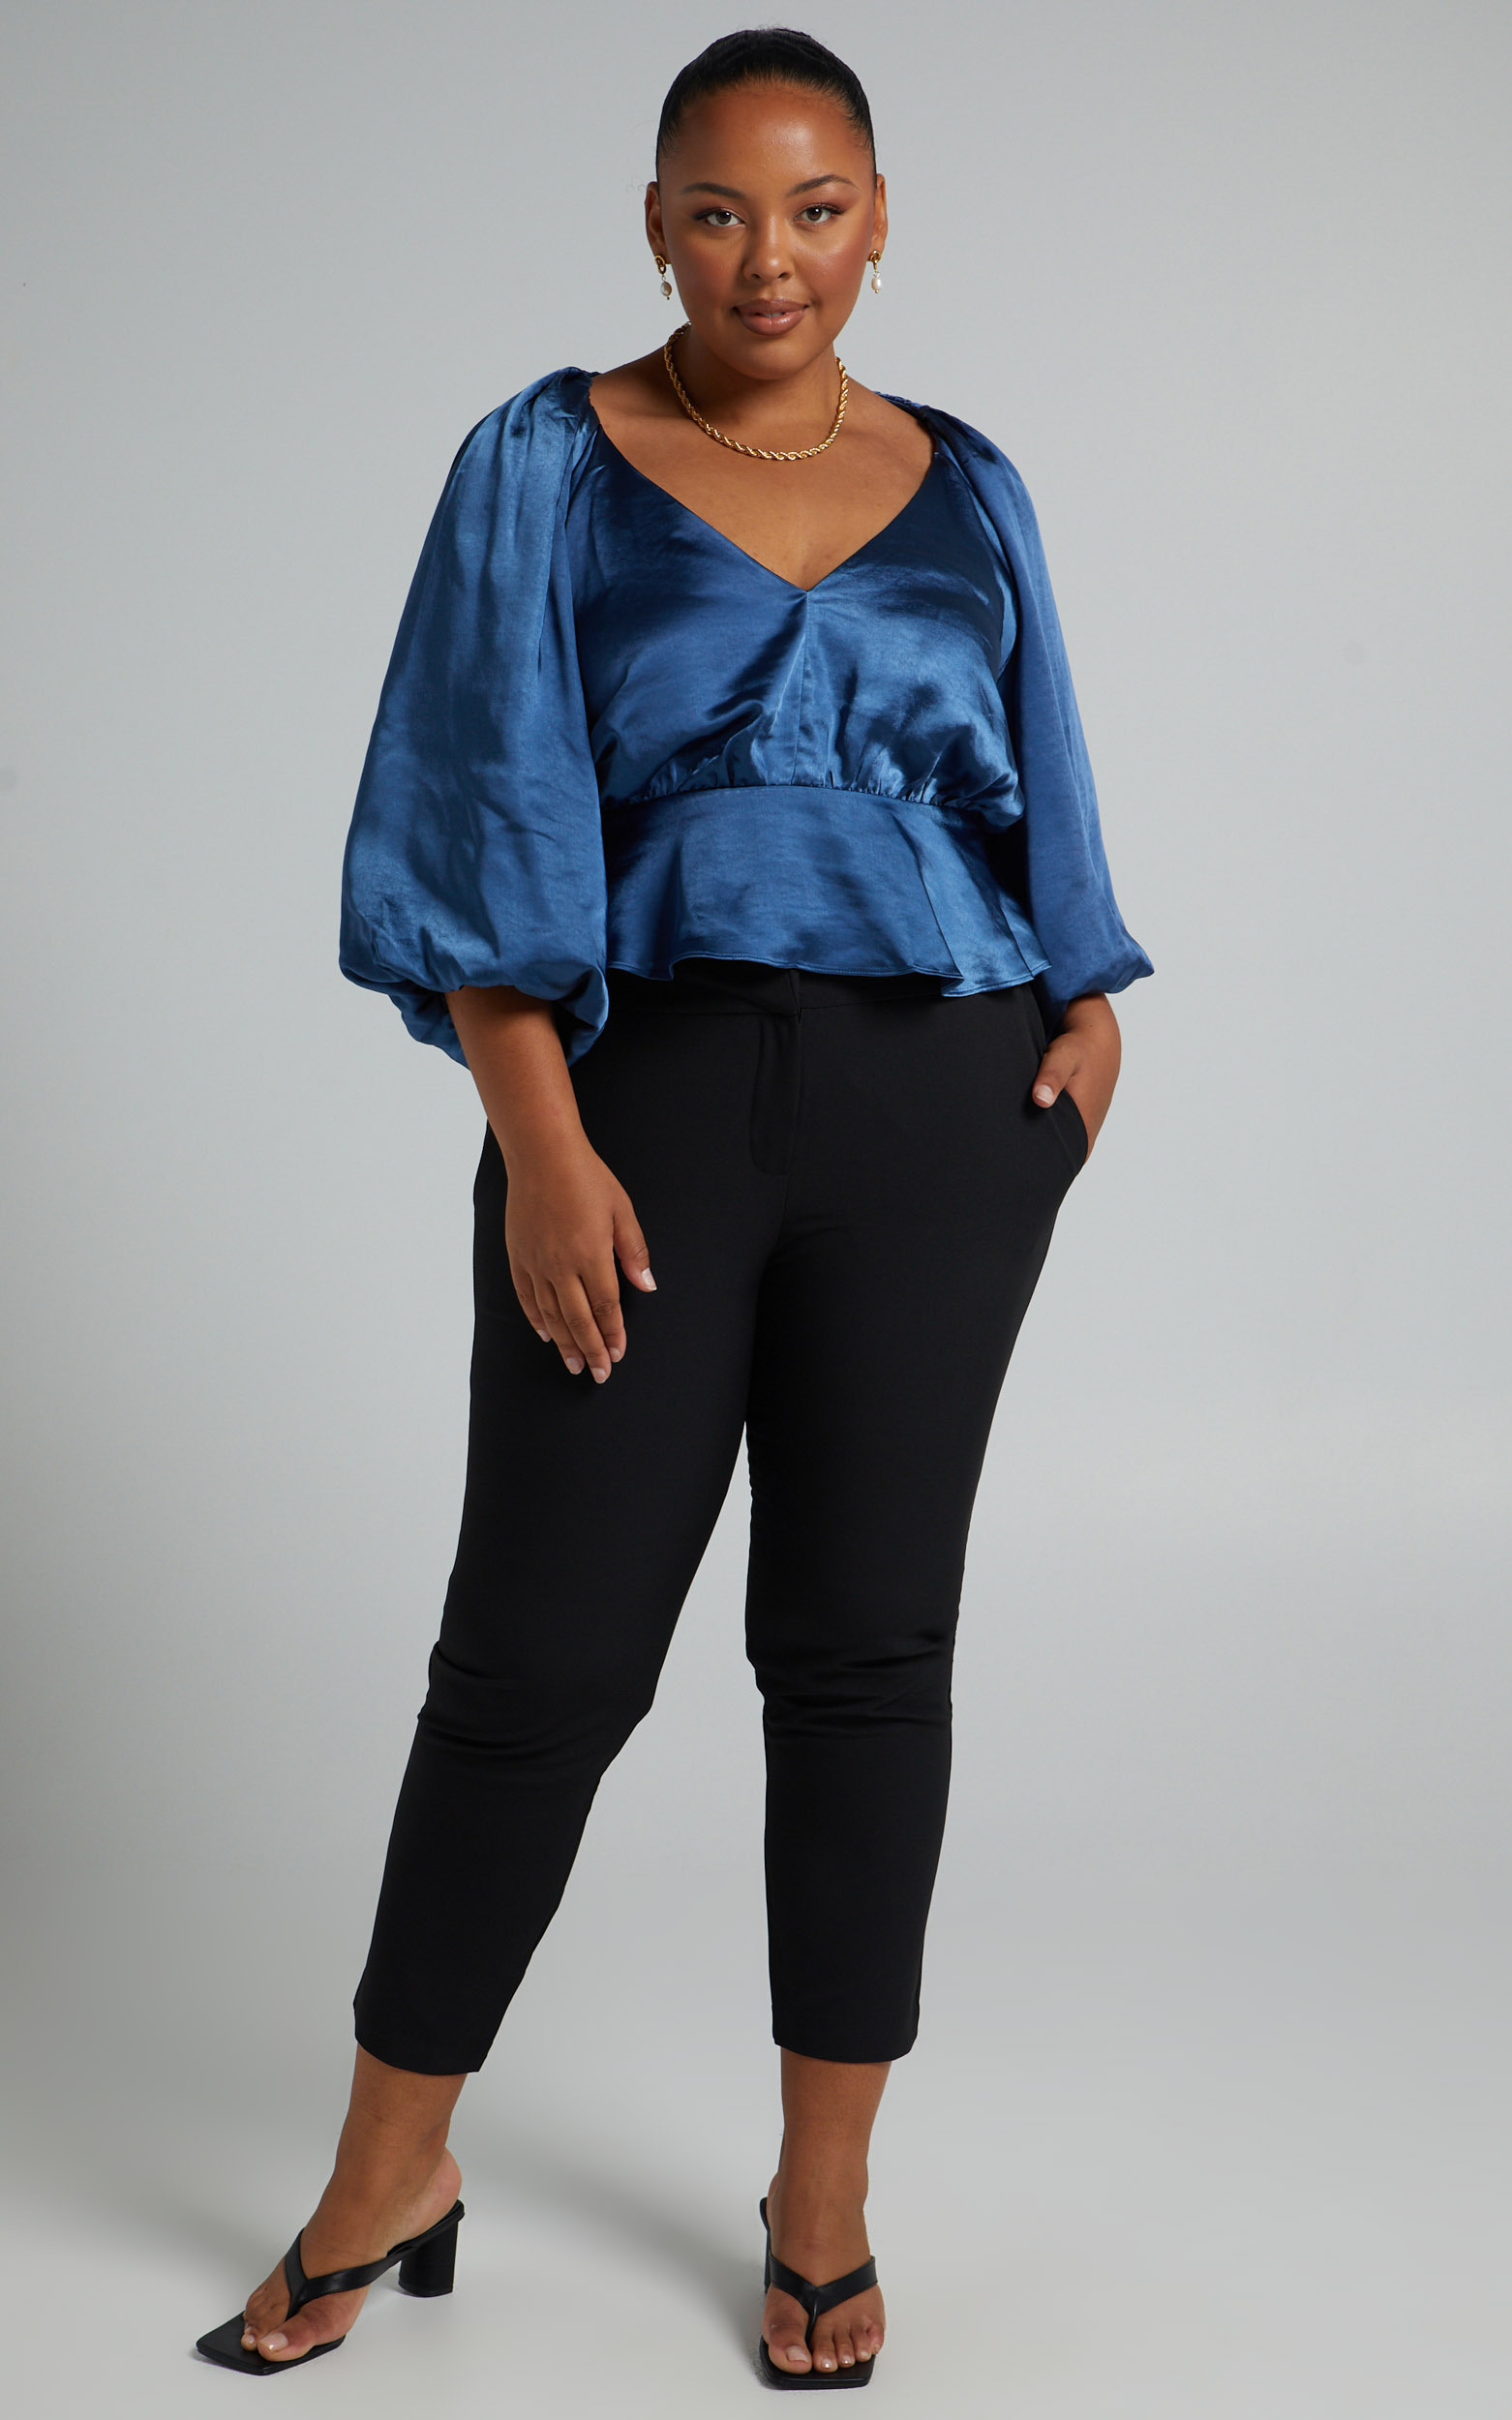 Rosette Balloon Sleeve Top in Dusty Blue - 04, BLU1, hi-res image number null